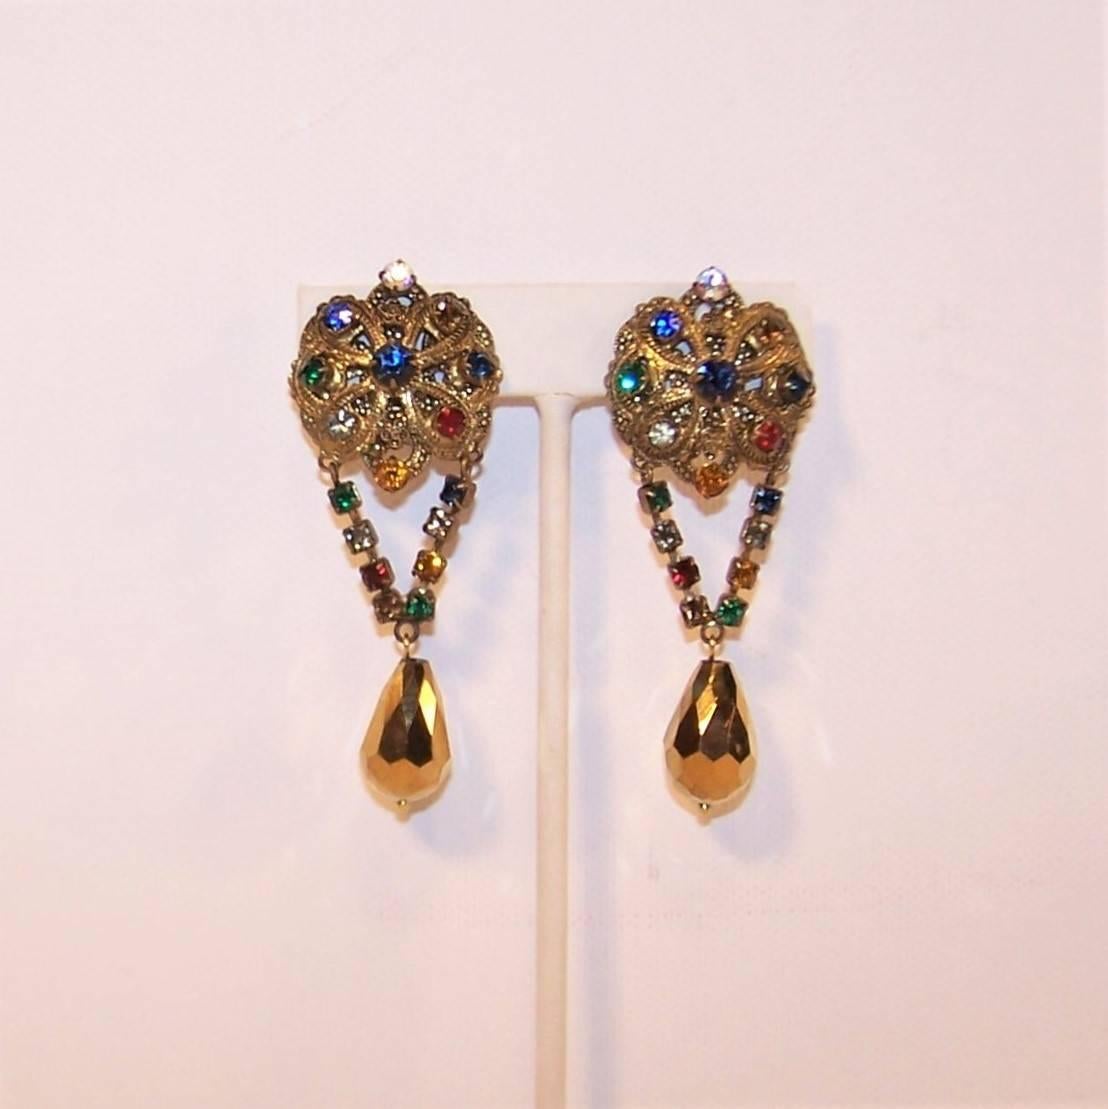 These 1950's clip on earrings have an old world style with regal details including an antiqued gold metal finish and jewel tone rhinestones.  The filigree base is reminiscent of Miriam Haskell fittings with a rhinestone chain supporting a glass